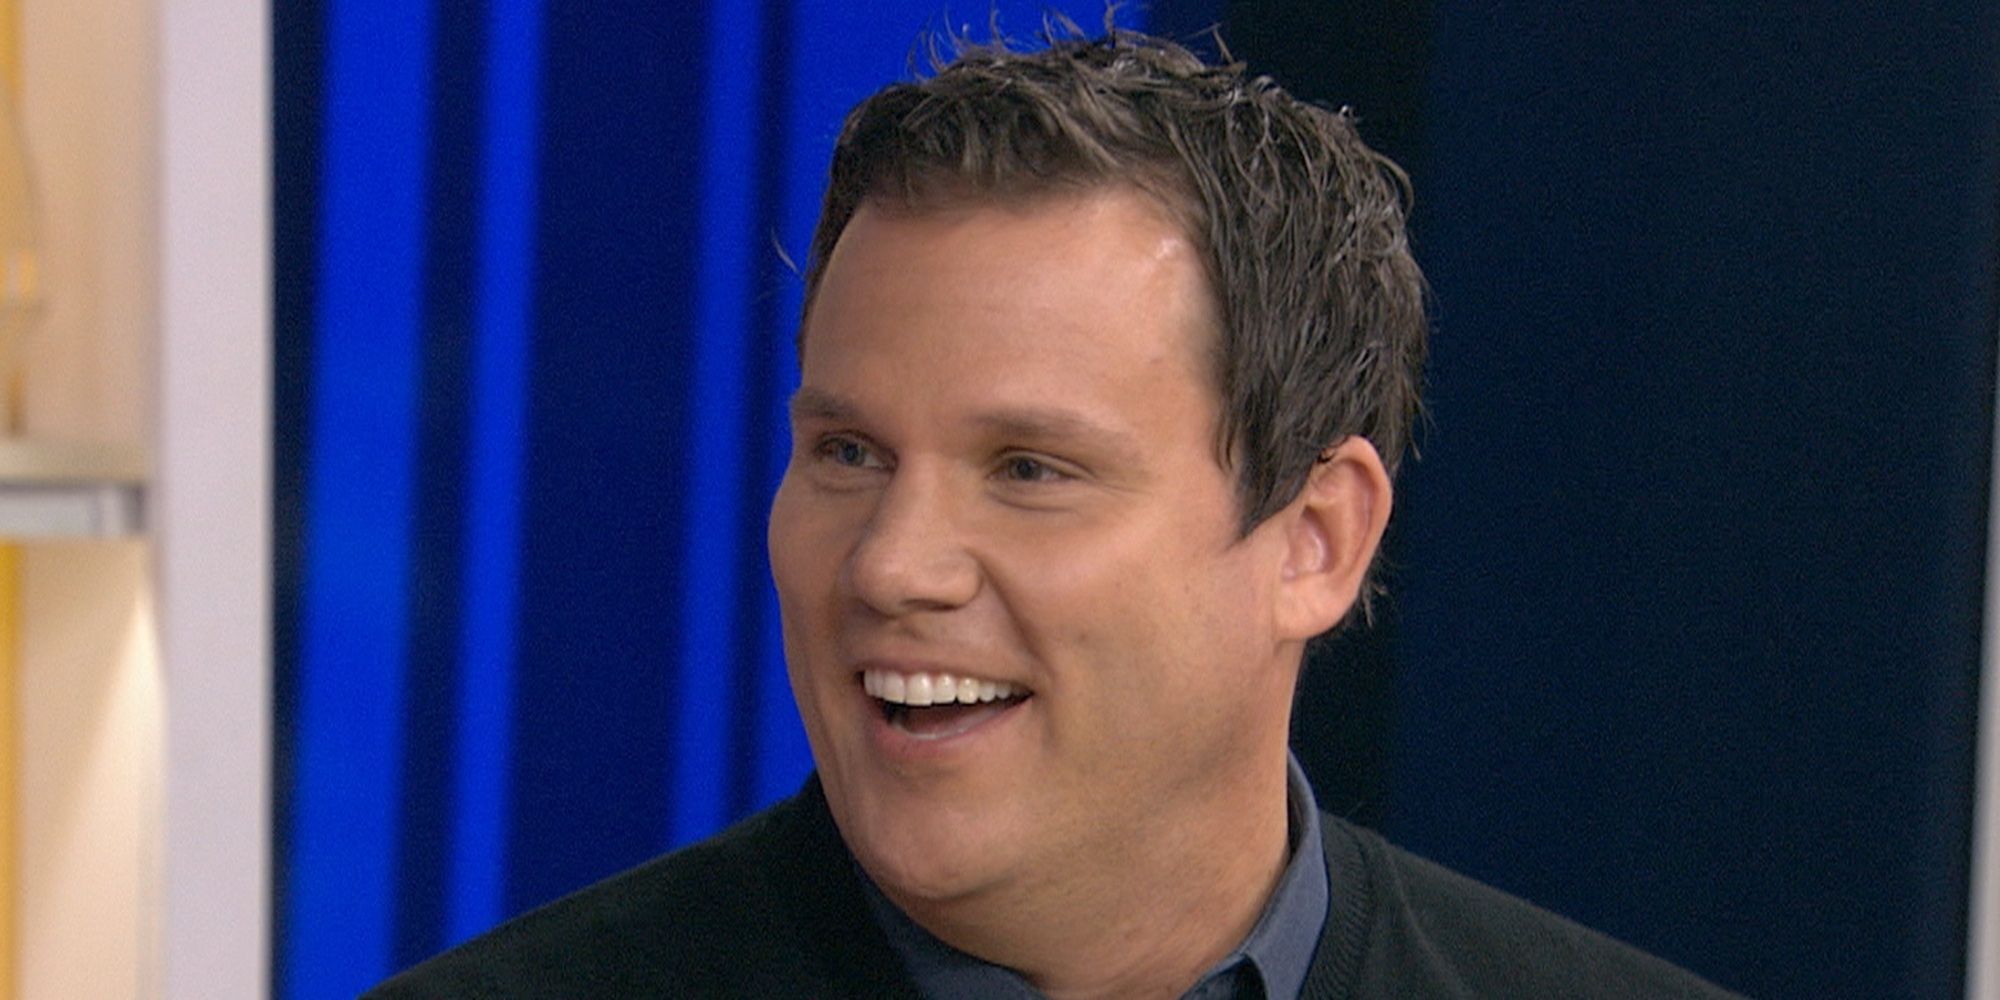 Bob Guiney smiles at someone off screen